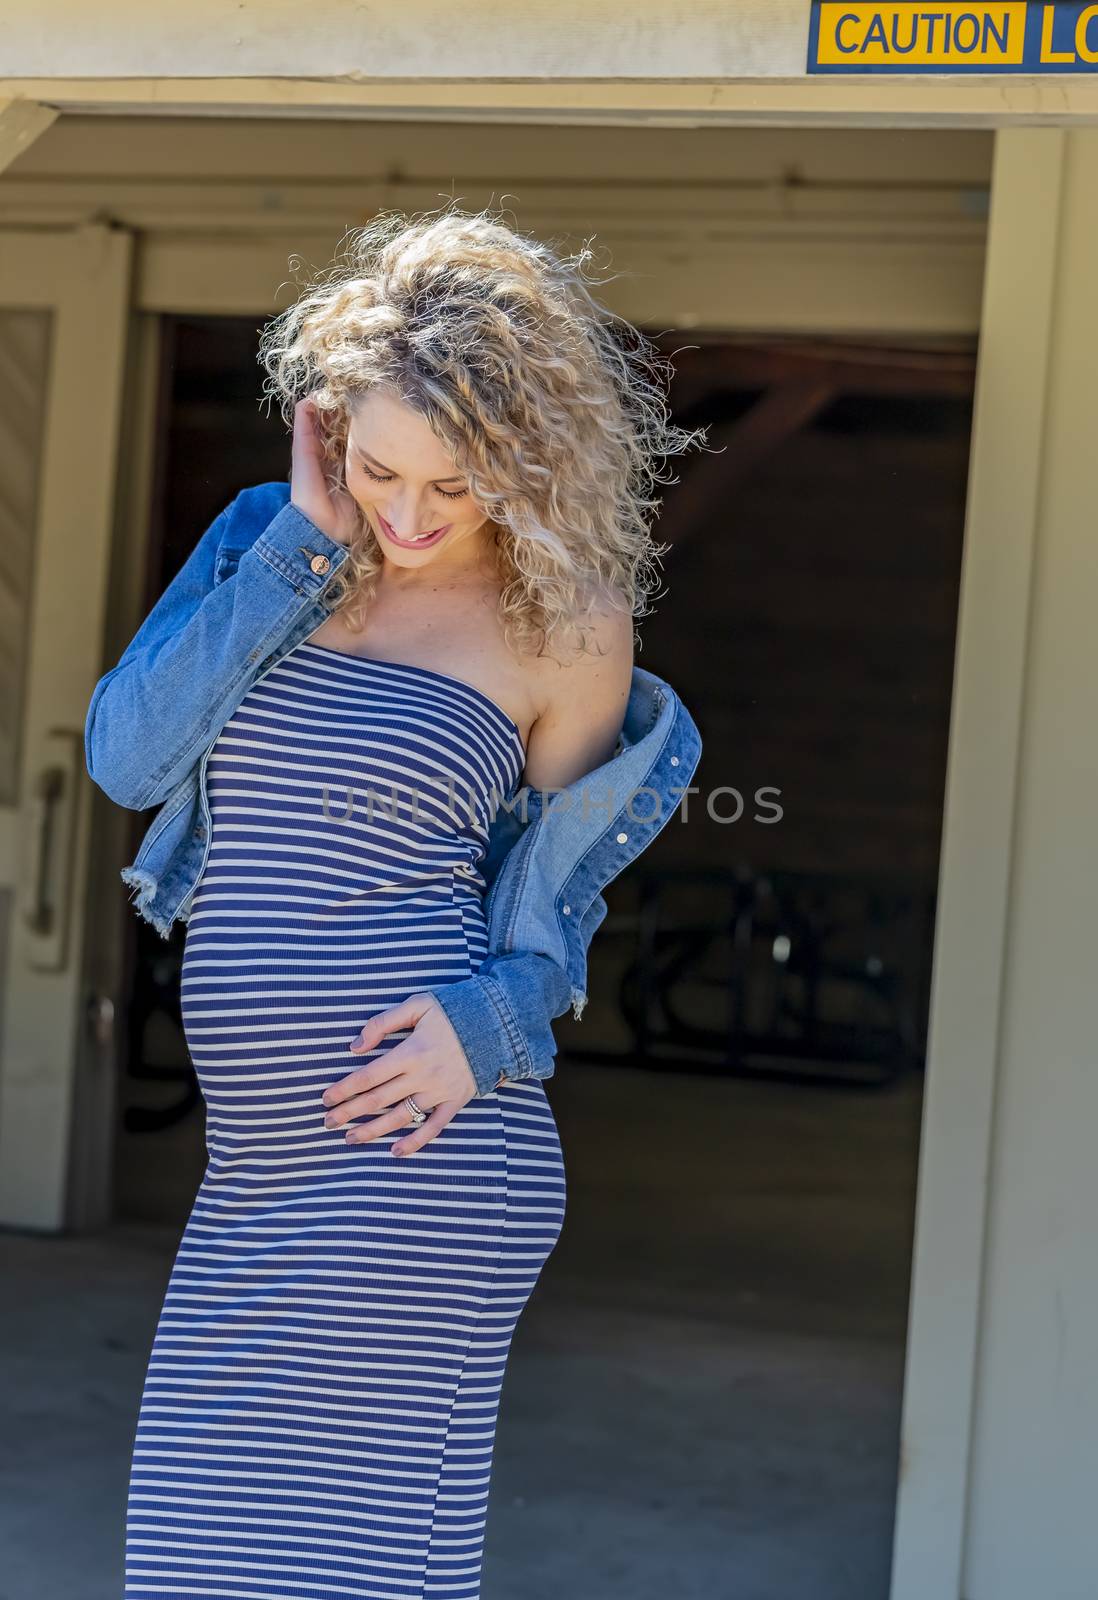 Pregnant Blonde Model At A Local Park by actionsports